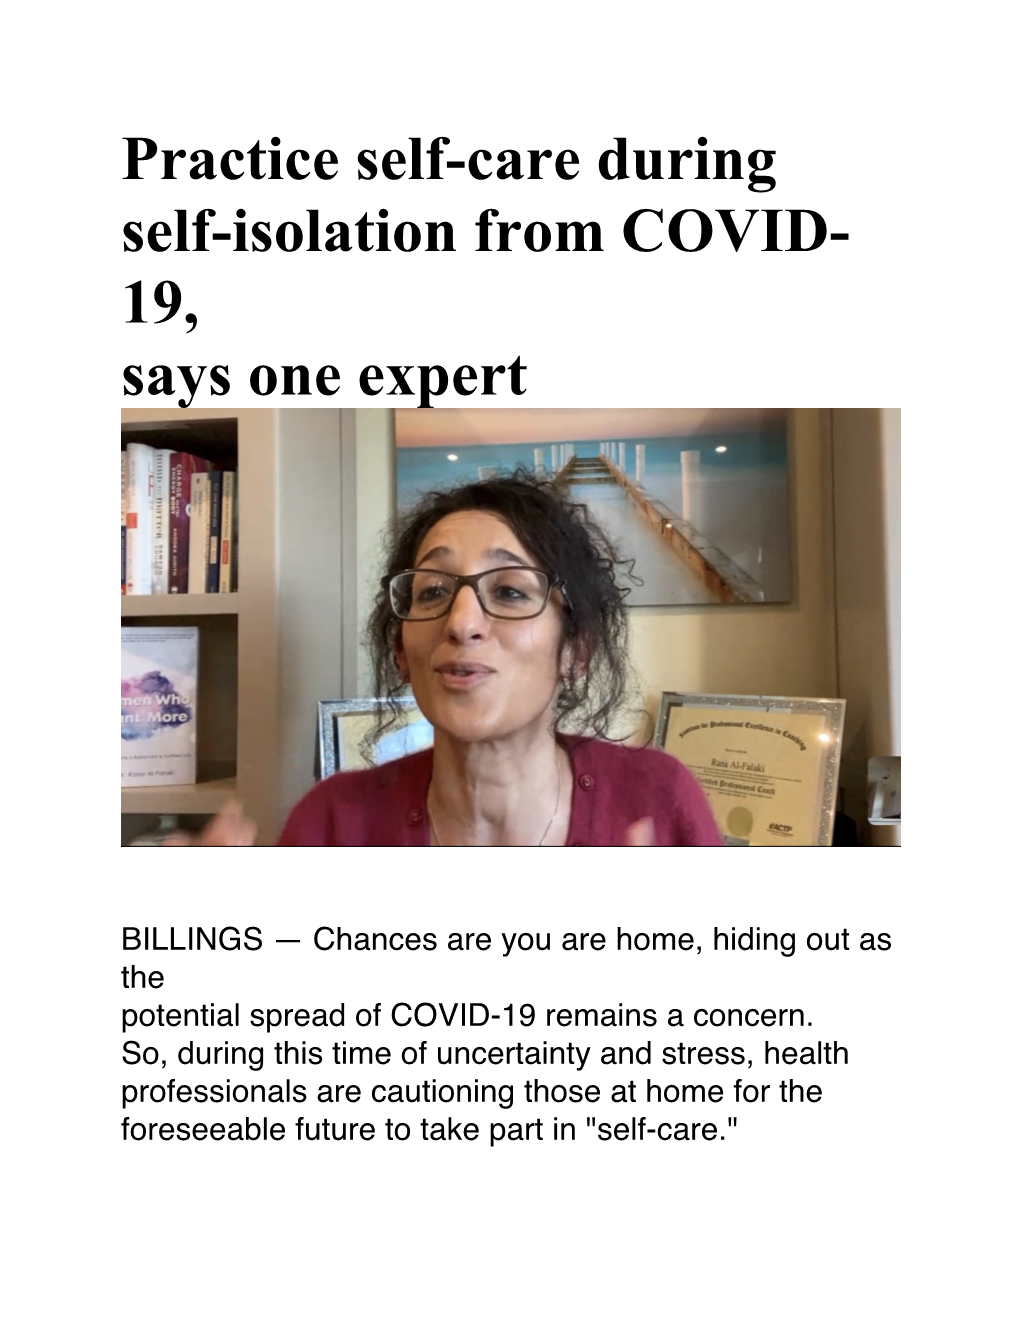 Practice Self-Care During Self-Isolation from COVID- 19, Says One Expert